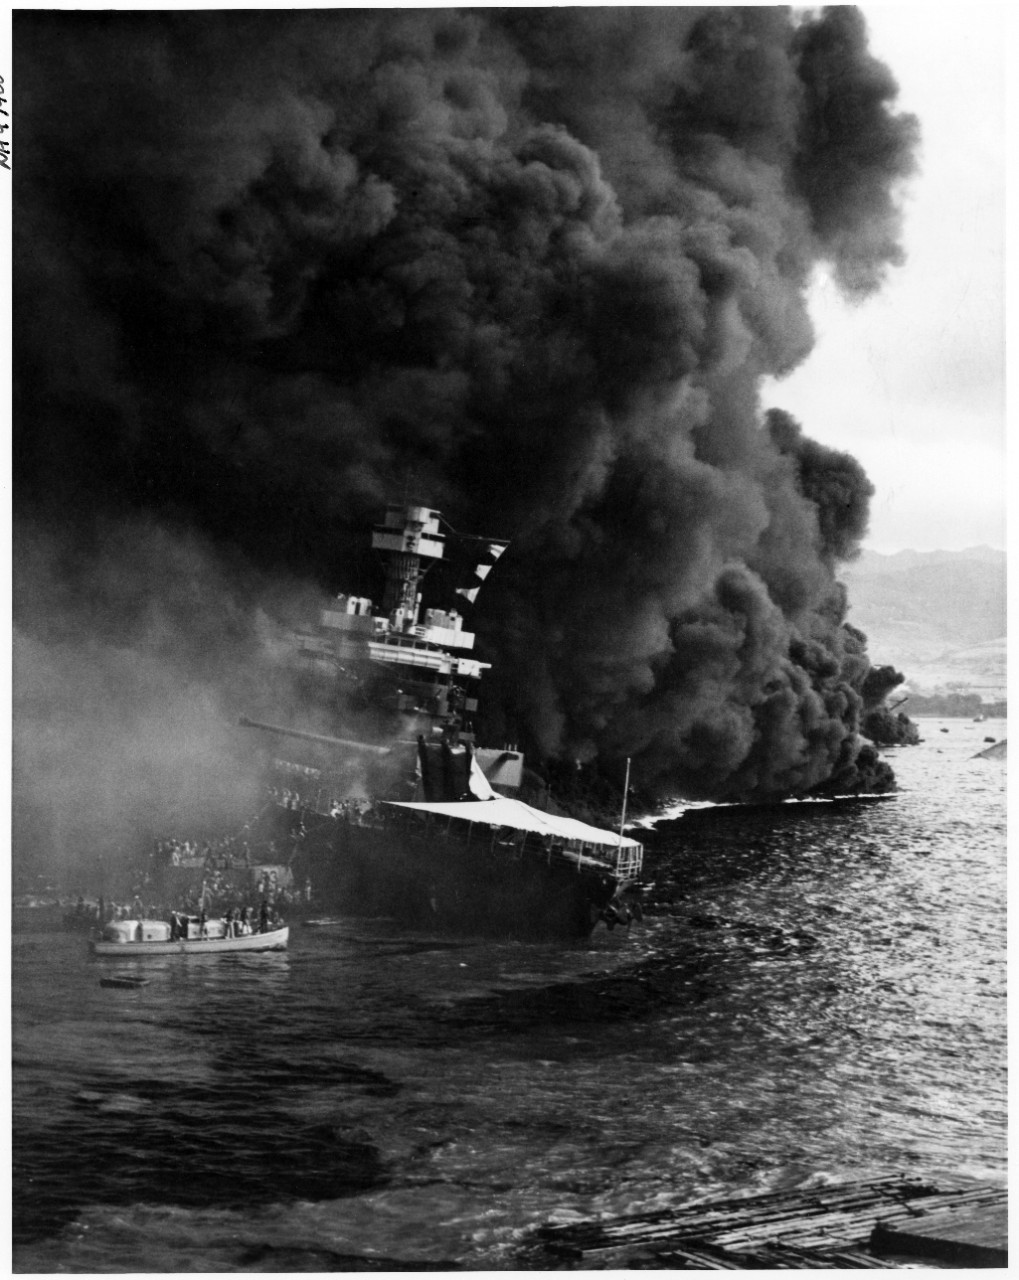 Photo #: NH 97400  Pearl Harbor Attack, 7 December 1941 For a MEDIUM RESOLUTION IMAGE, click the thumbnail.